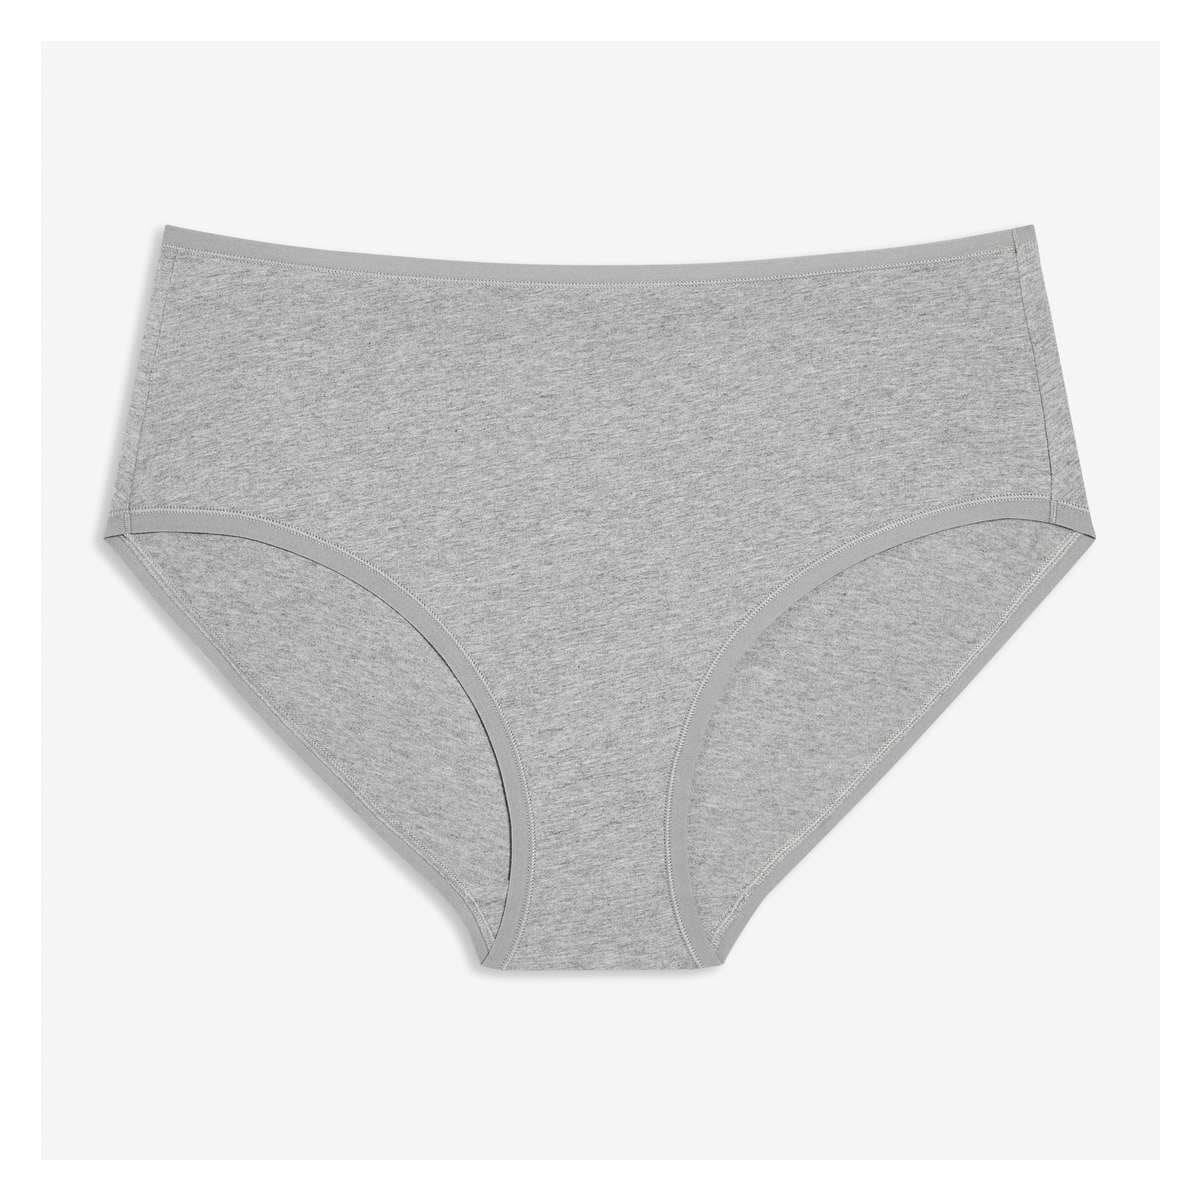 Gray 100% Cotton Brief Panties for Women for sale